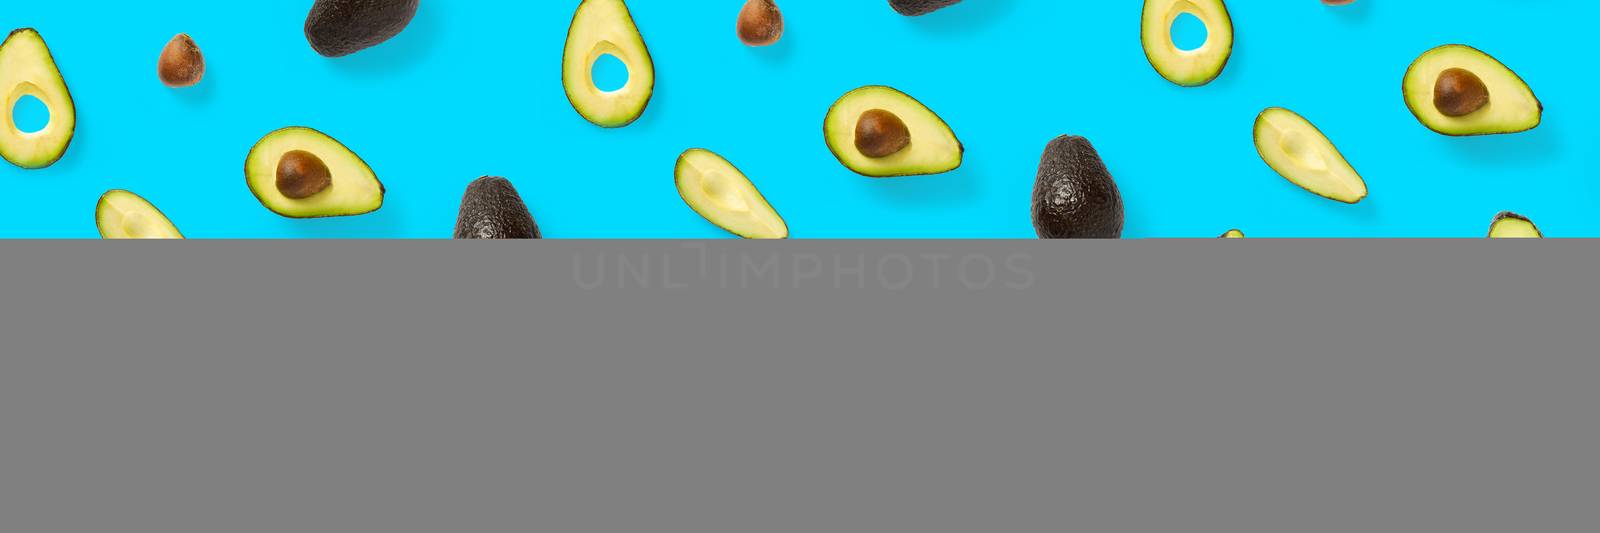 Avocado banner. Background made from isolated Avocado pieces on blue background. Flat lay of fresh ripe avocados and avacado pieces. by PhotoTime